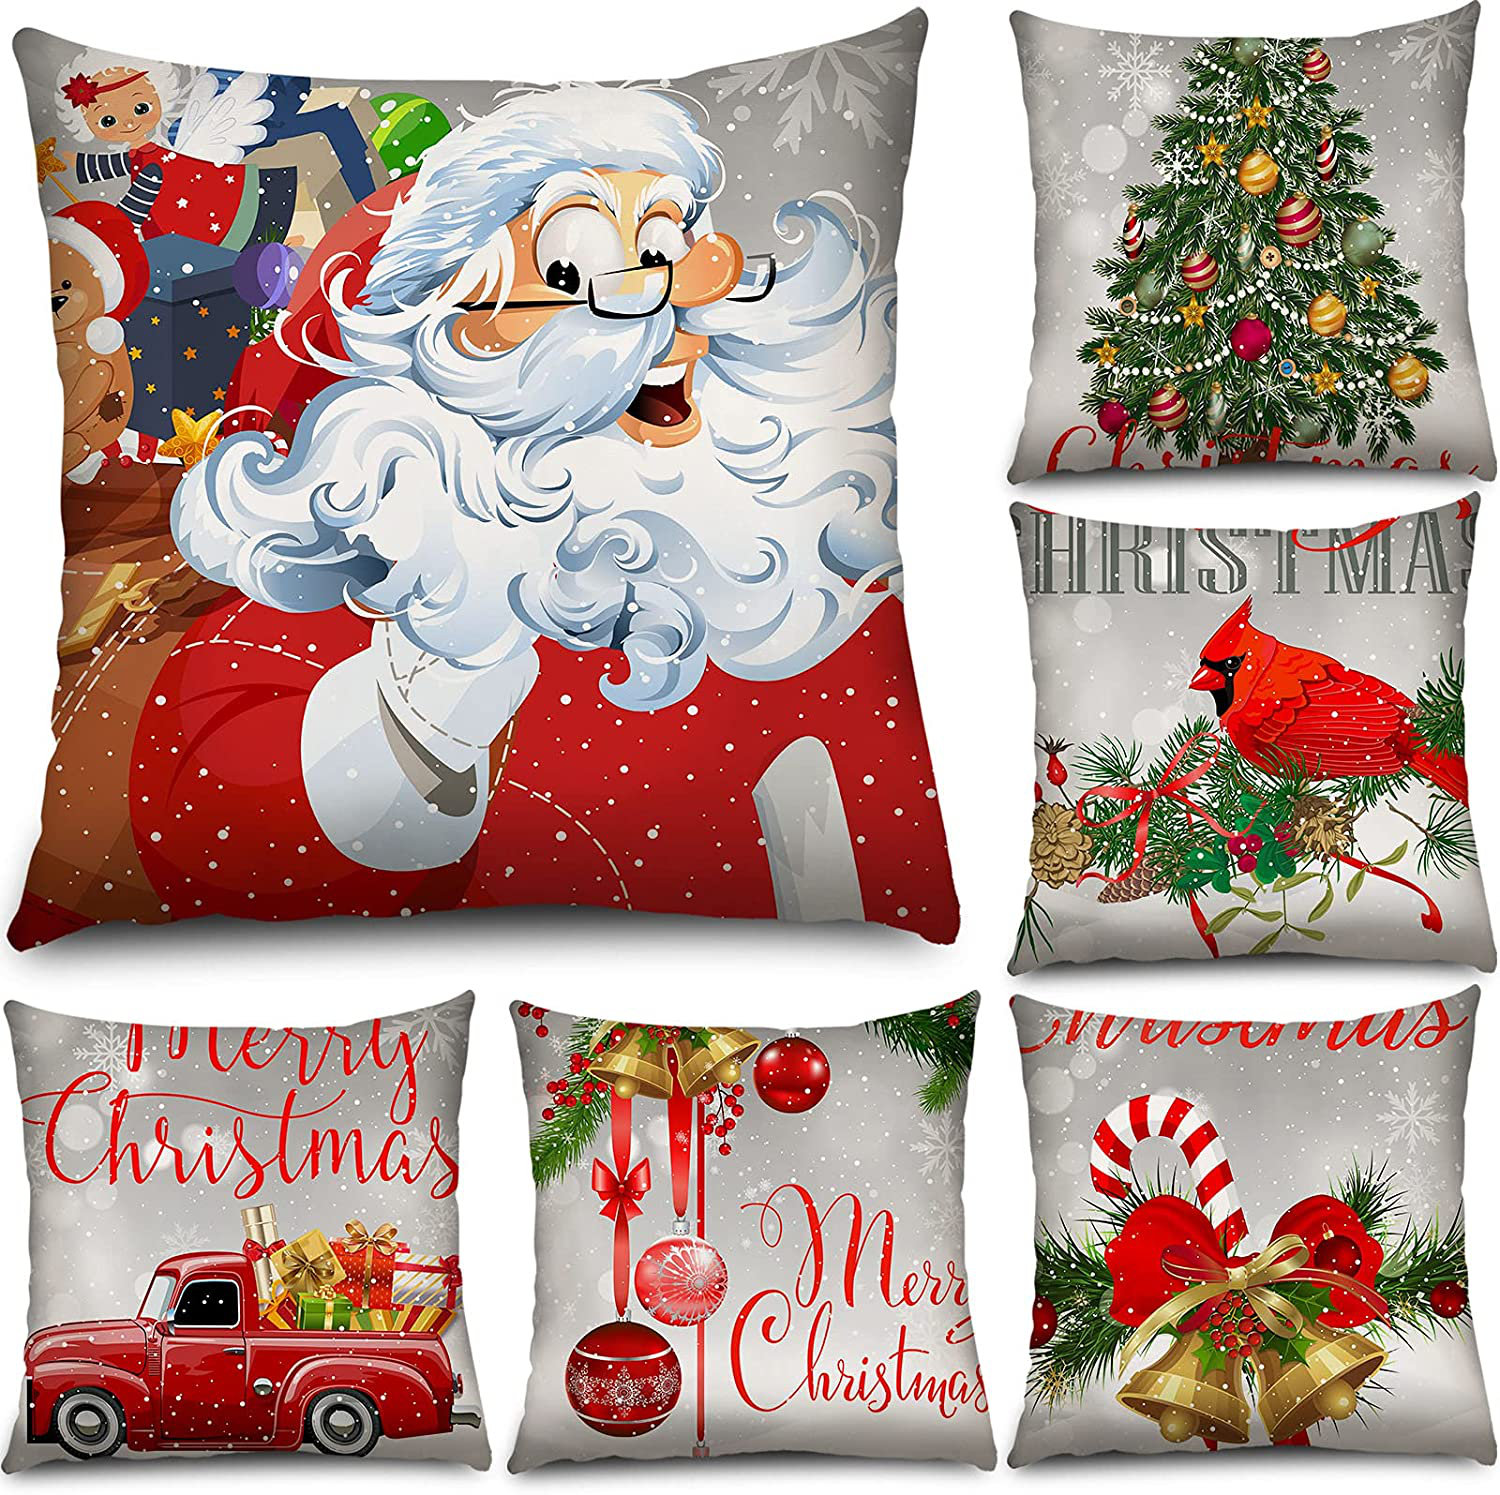 18 x 18 Inches 6 Pieces Christmas Throw Pillow Covers Merry Christmas Decorative Cushion Covers Christmas Truck Snowflake Colorful Buffalo Plaid Pillowcase Cushion Covers for Holiday Home Decor 